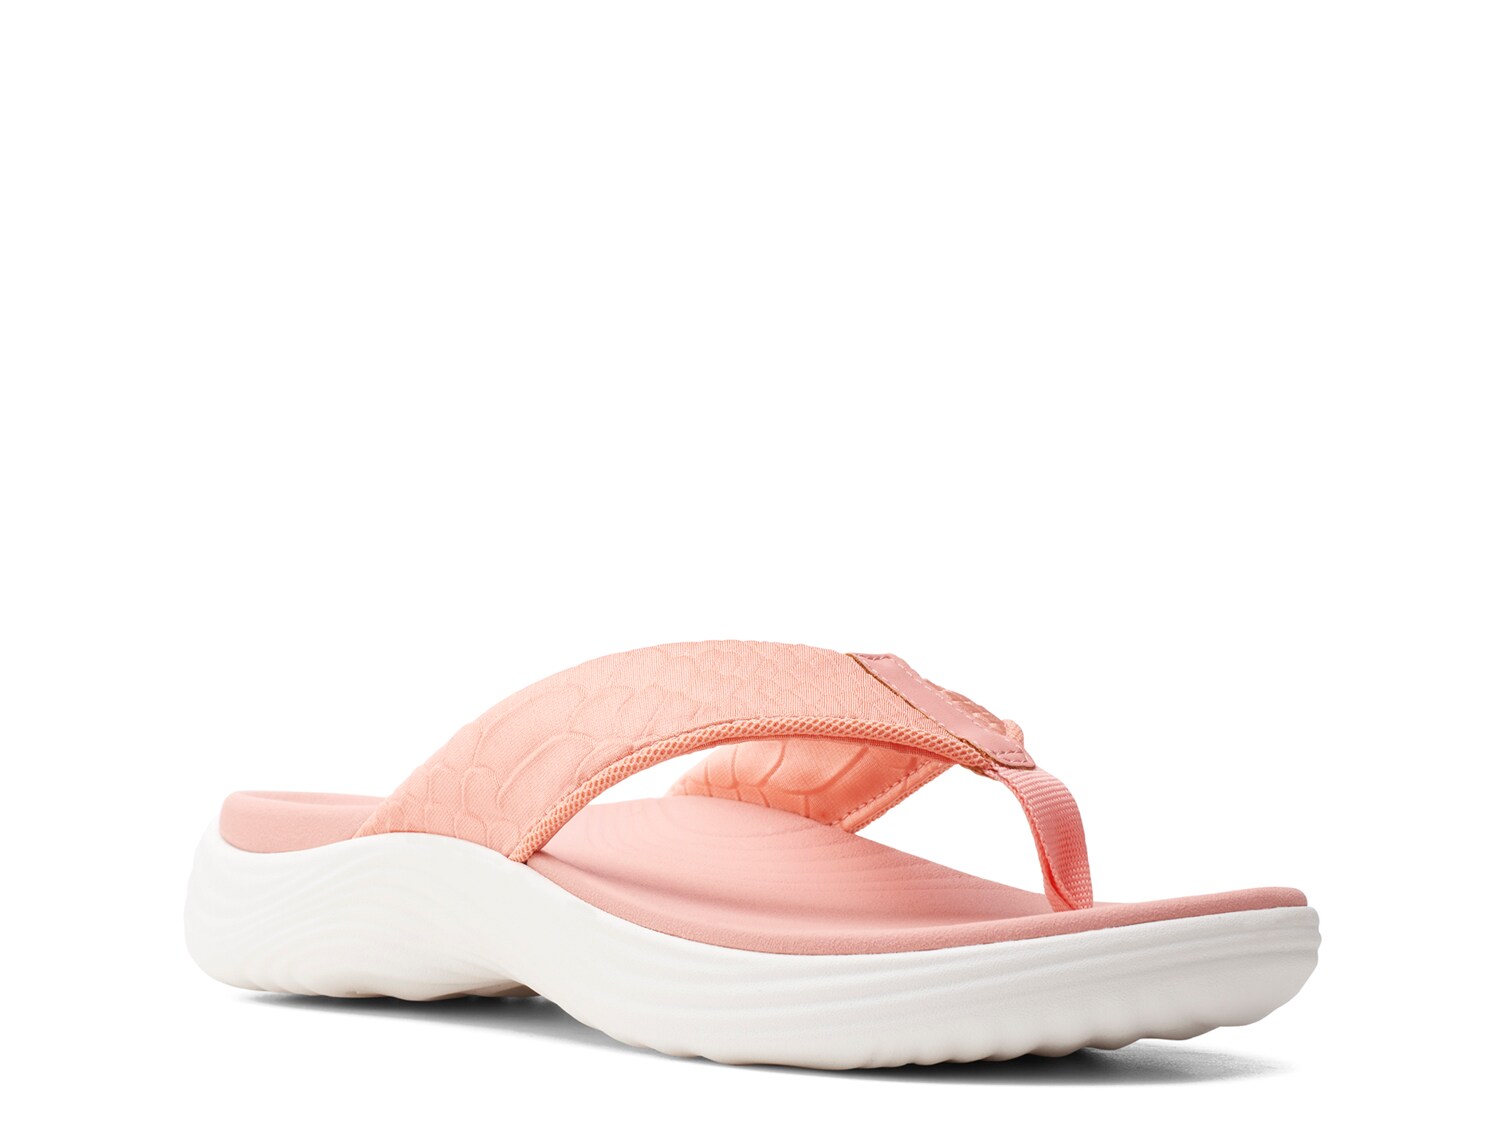 Cloudsteppers by Clarks Shoes, Sandals 